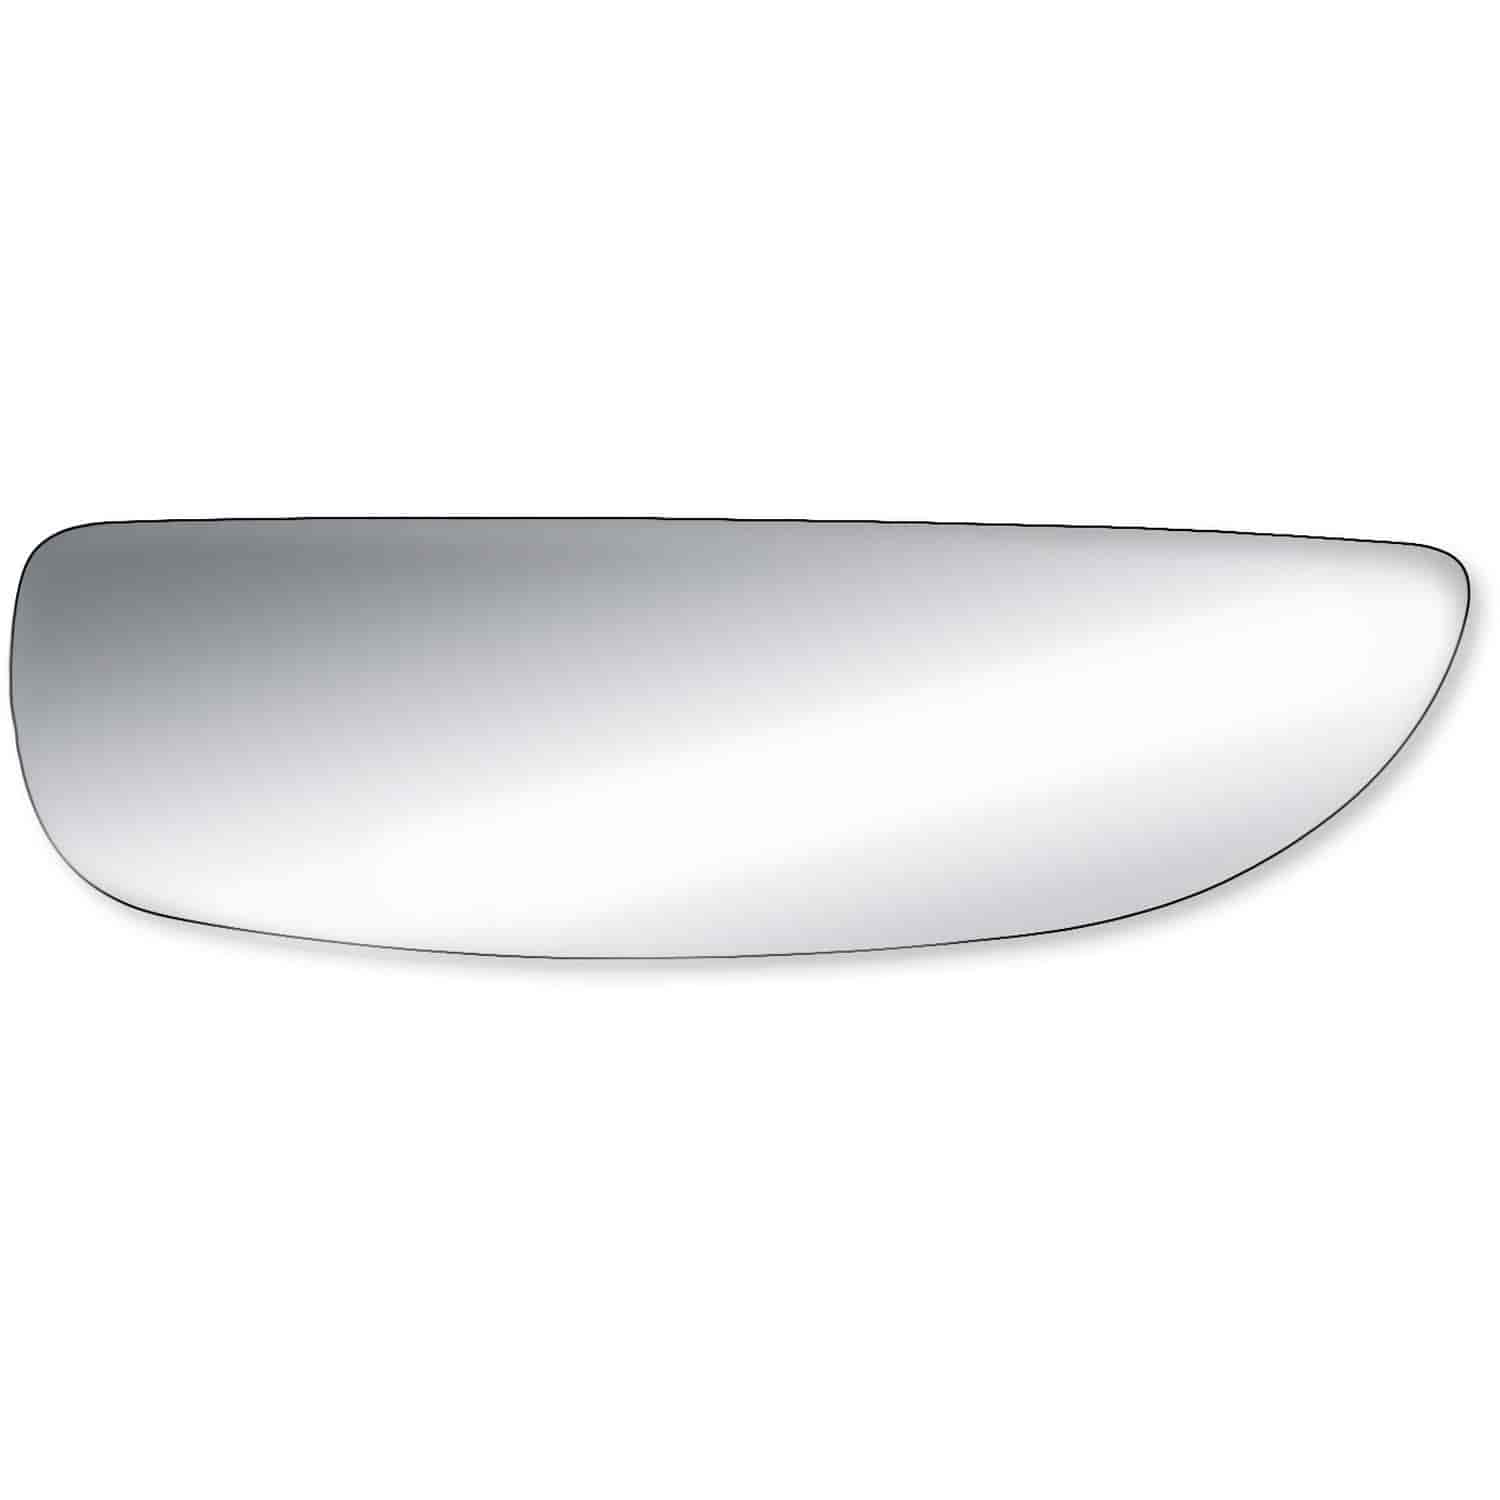 Replacement Glass for 02-14 Econoline towing mirror bottom lens ; 00-05 Excursion towing bottom lens